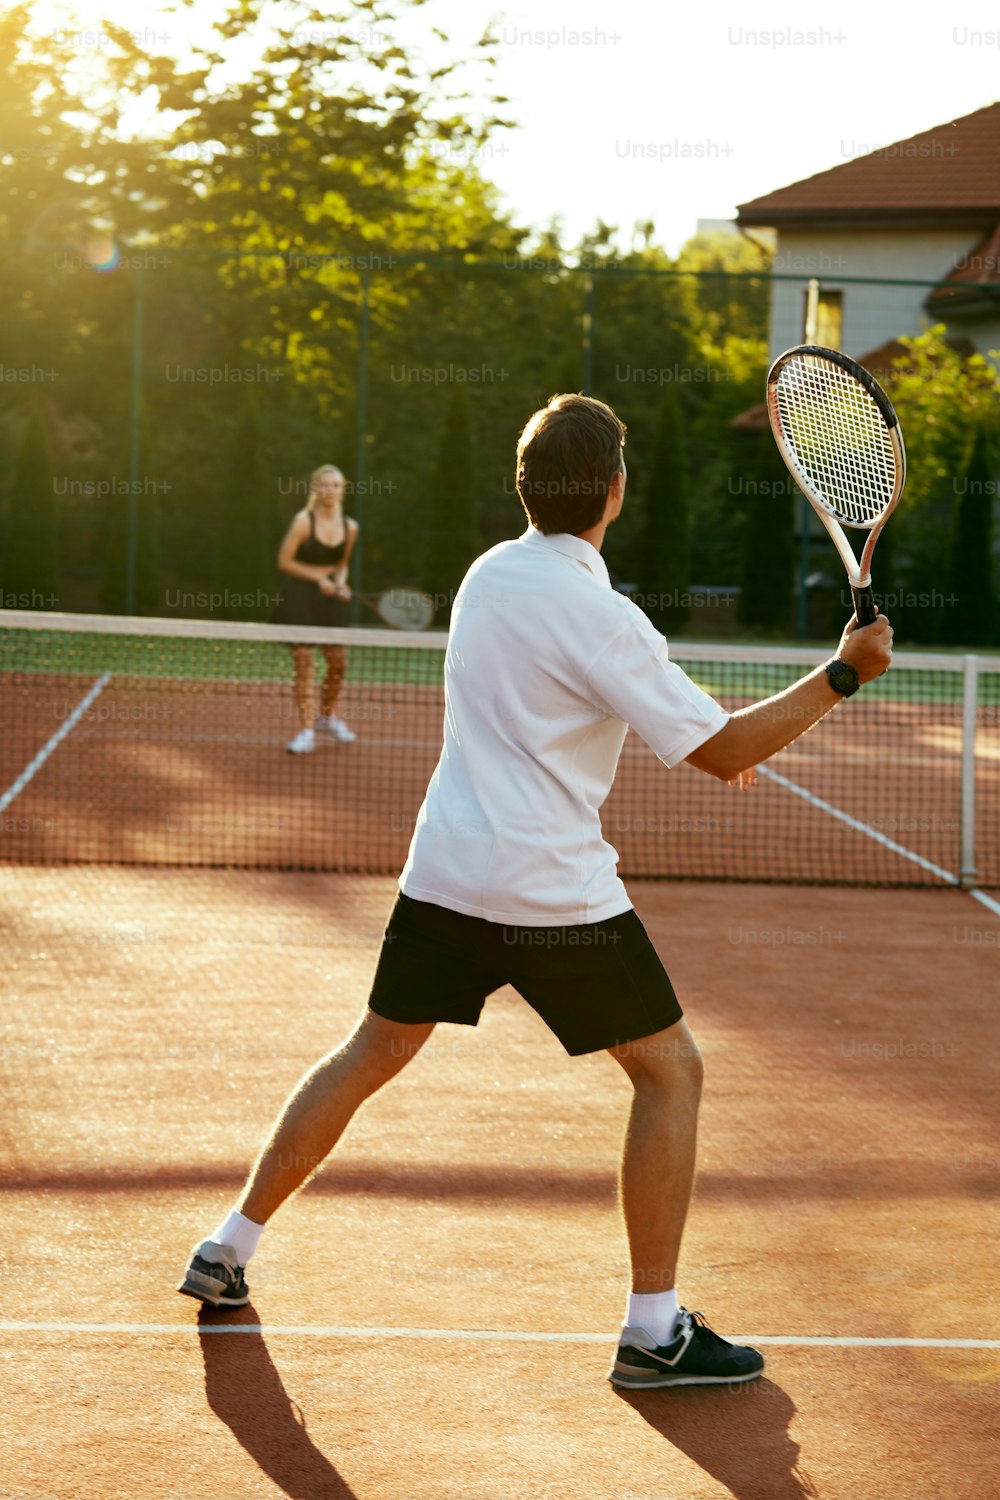 Young People Playing Tennis Outdoors. Healthy Active Man And Woman Holding Rackets In Hands Playing Tennis Match On Open Court On Sunny Summer Day. Sports And Lifestyle. High Resolution.